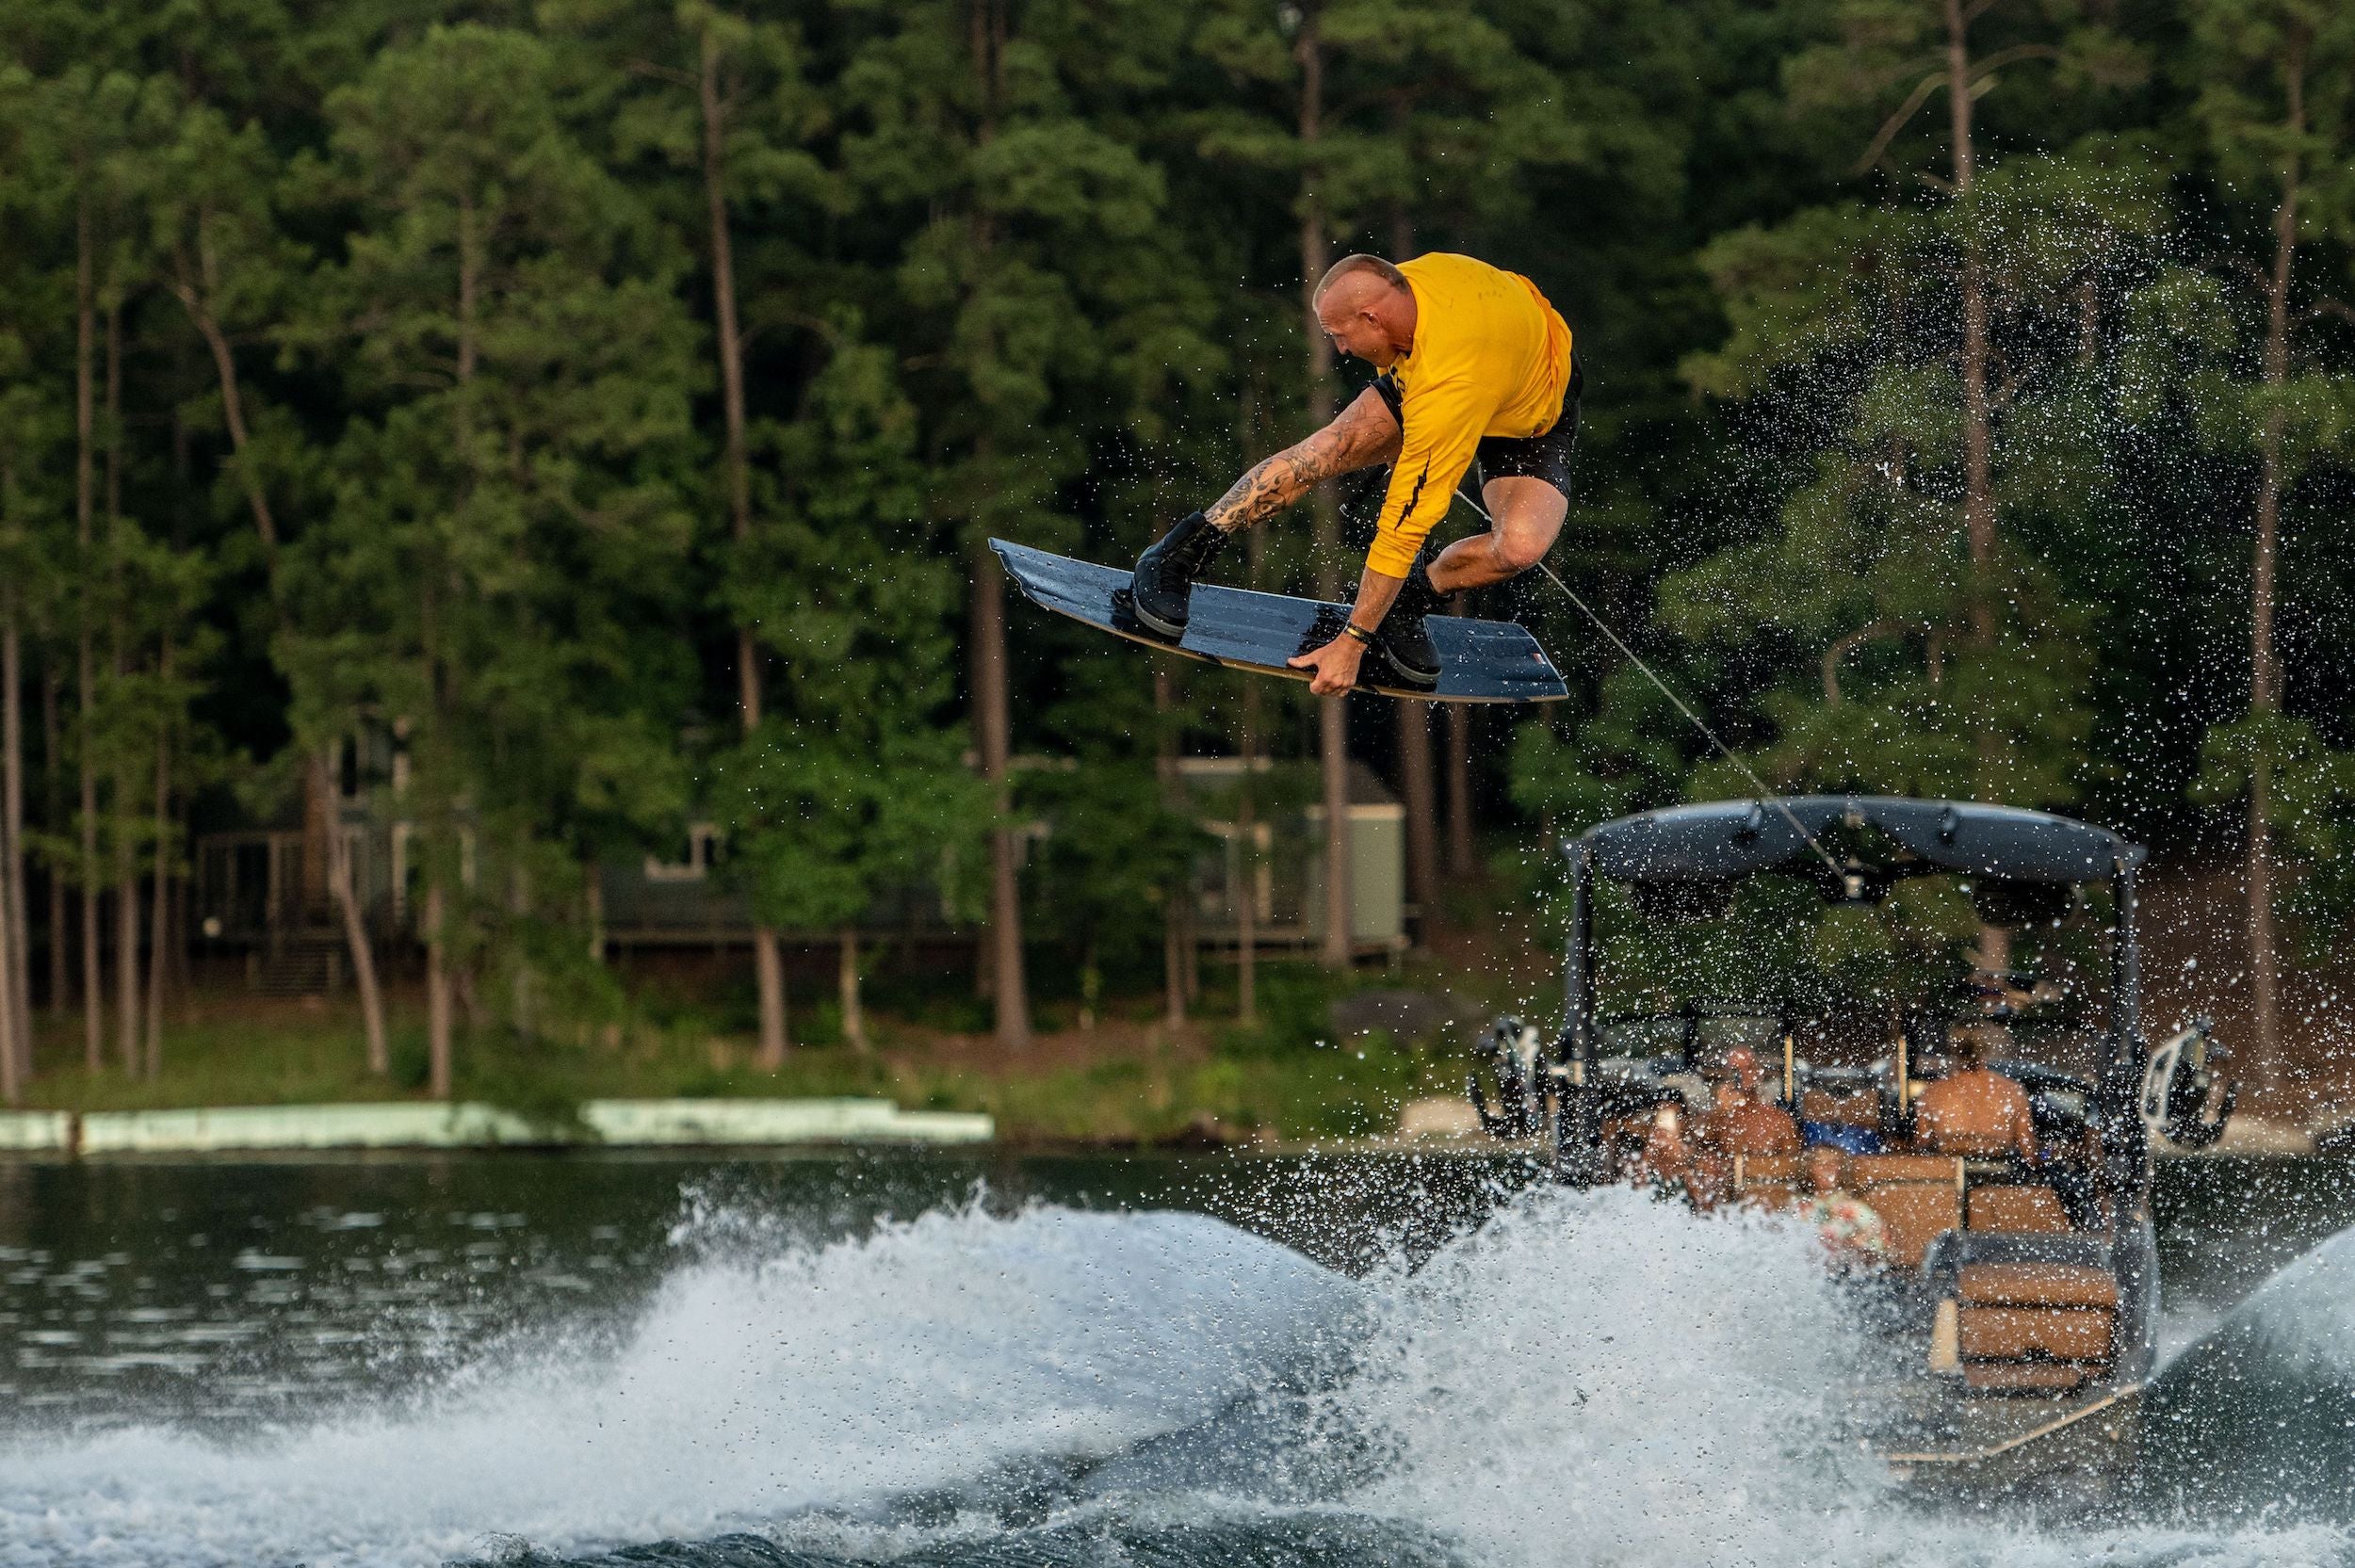 A man named Rusty Malinoski, wearing a yellow shirt, is performing a trick on a Hyperlite 2023 Rusty Pro Wakeboard with a poppy feel.